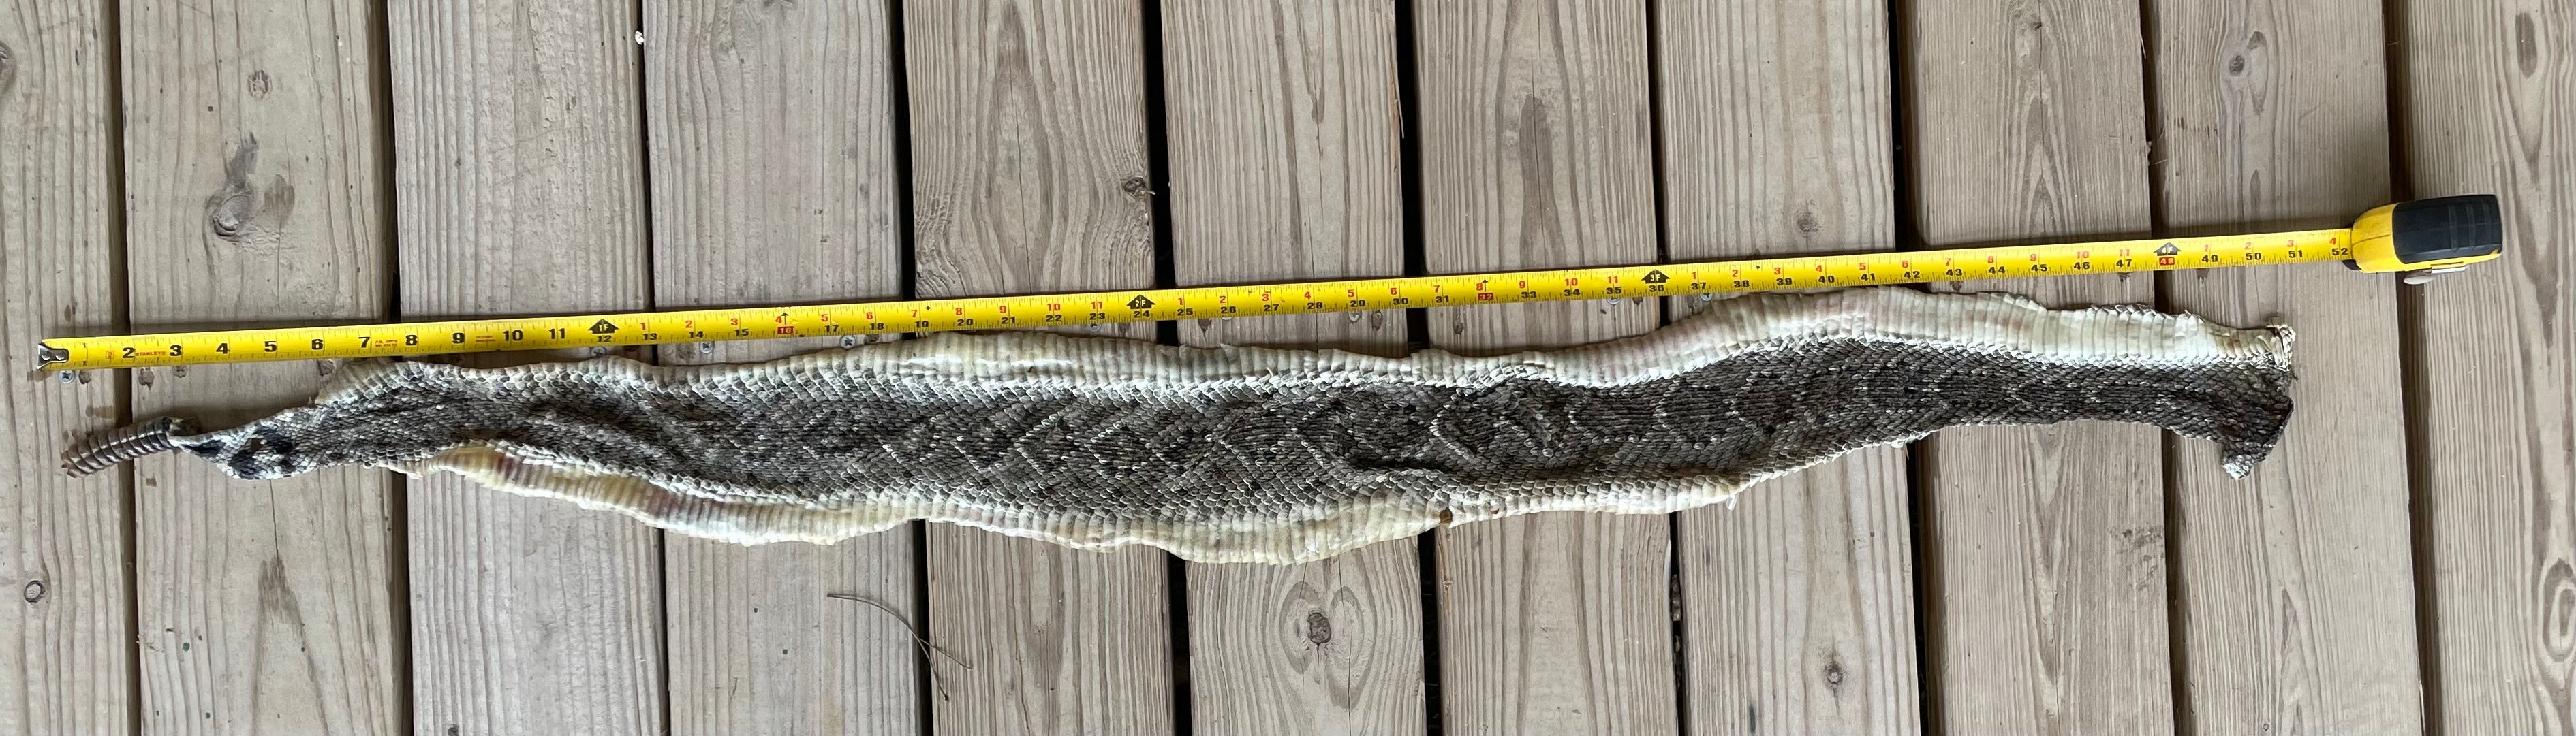 Texas Rattle Snake Skin With 11 Button Rattler 4'3"